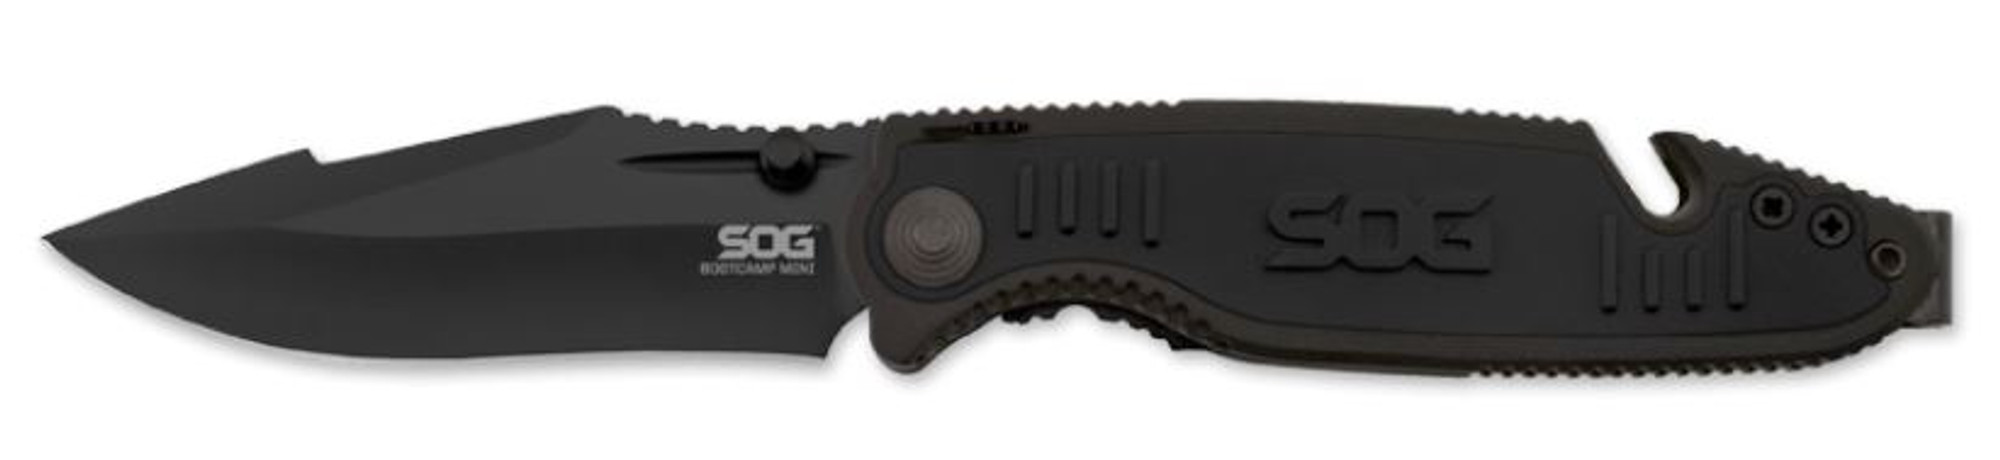 SOG BCP103 Boot Camp Mini Hardcased Assisted Open